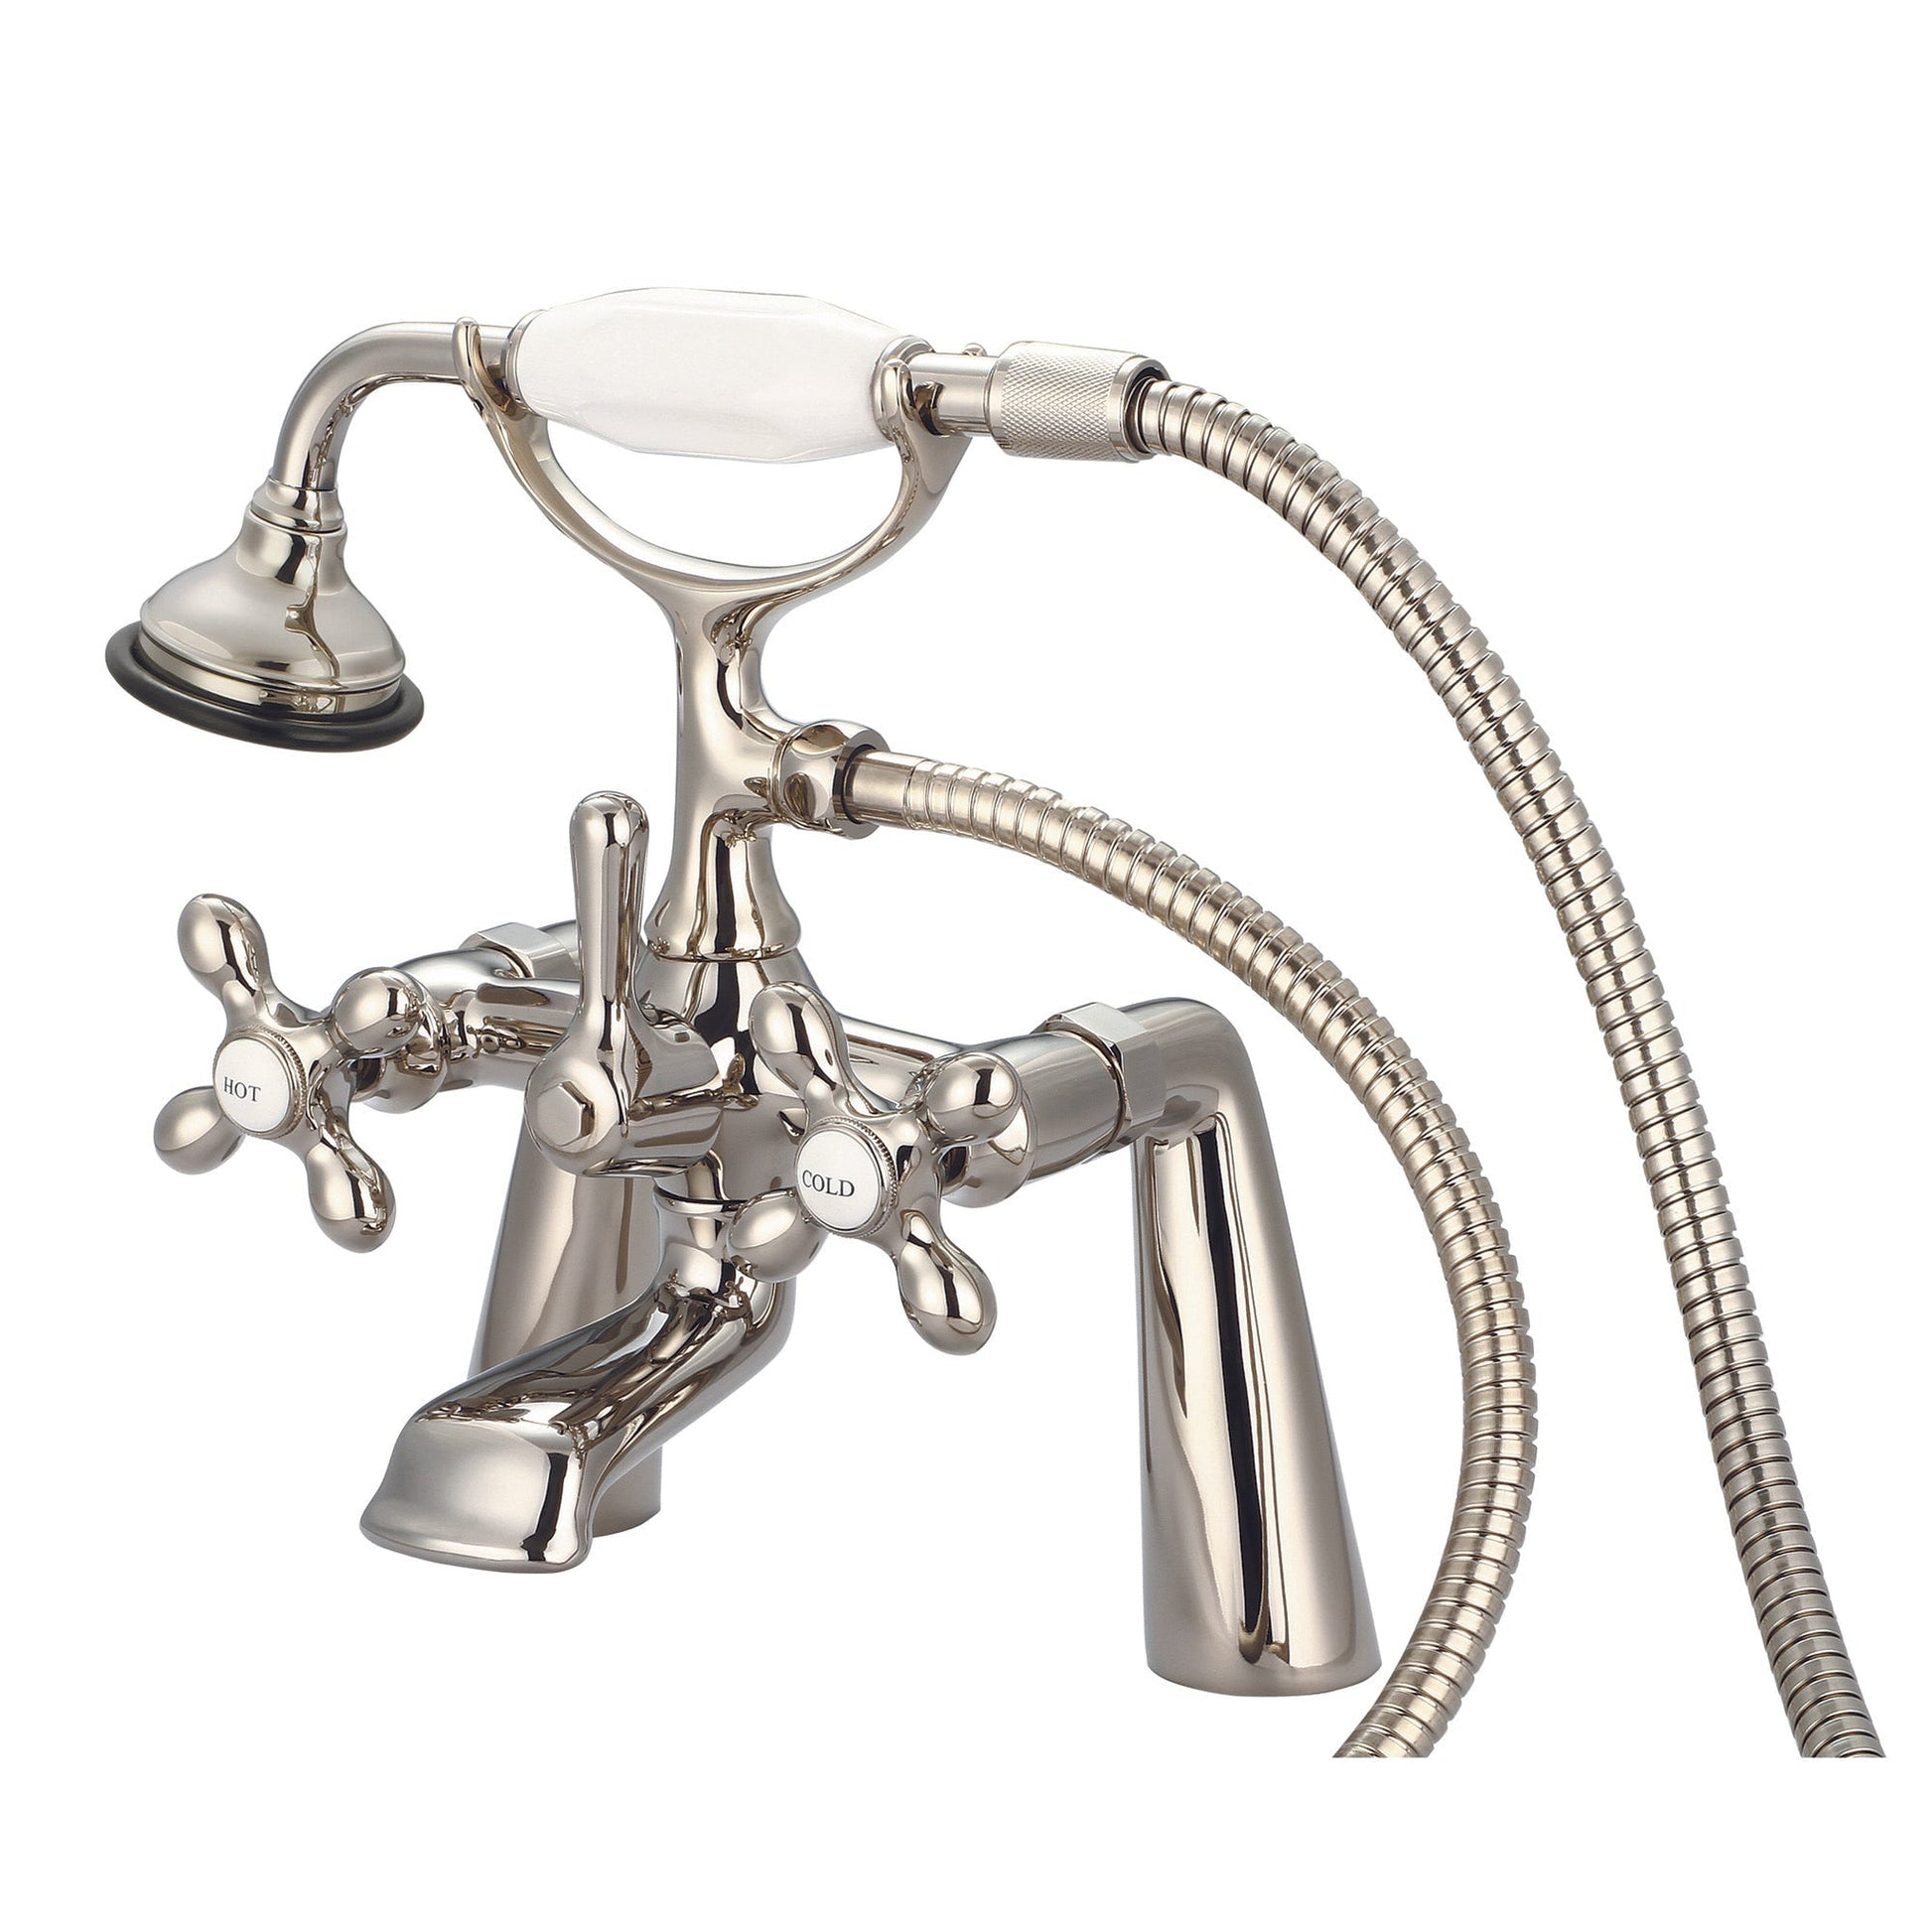 Water Creation Vintage Classic Spread Deck Mount Tub F6-0003 7.5" Ivory Solid Brass Faucet With Handheld Shower And Metal Lever Handles, Hot And Cold Labels Included